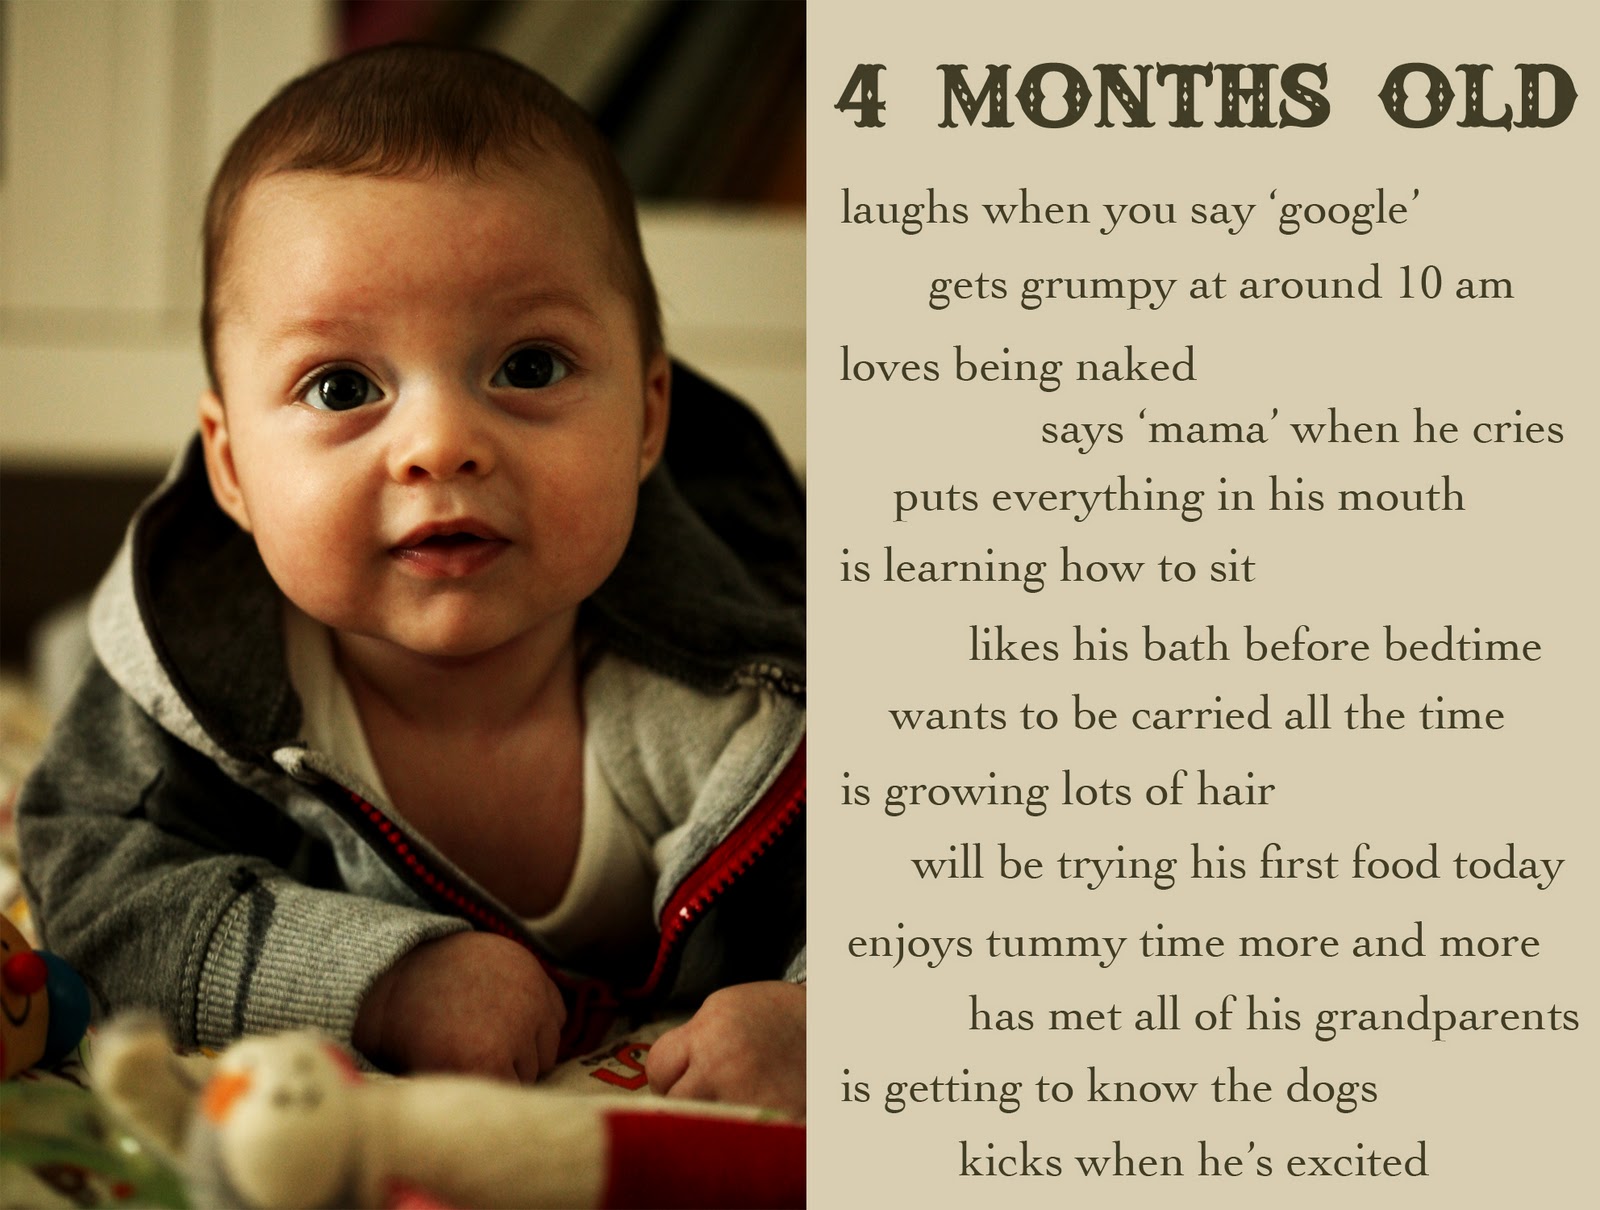 4 Months Old Baby Development: What to Expect